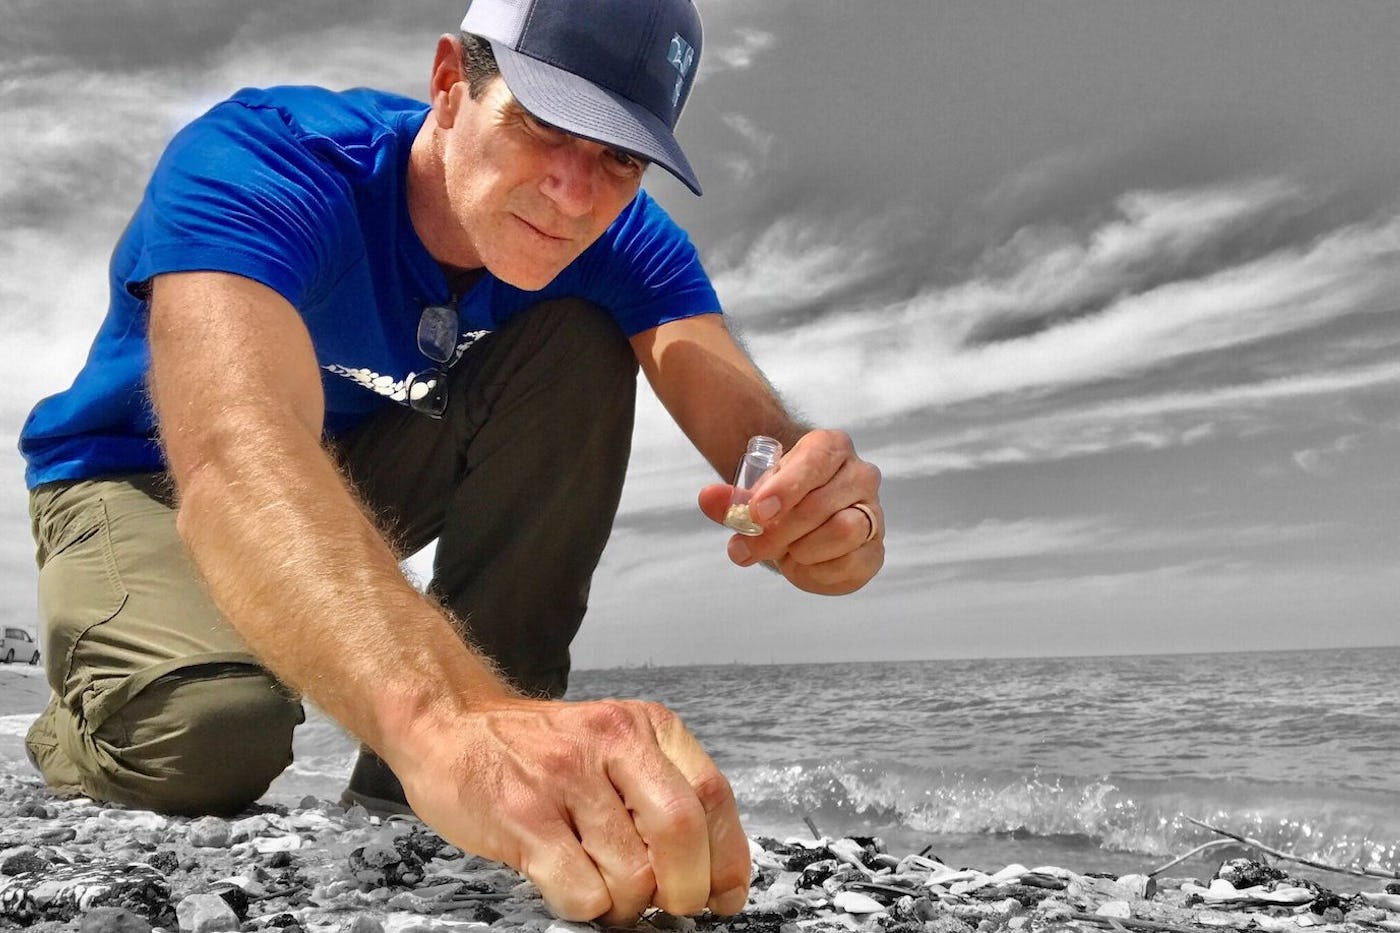 Jace Tunnell of the Nurdle Patrol on the beach crouches and picks up plastic pellets to add to a tube